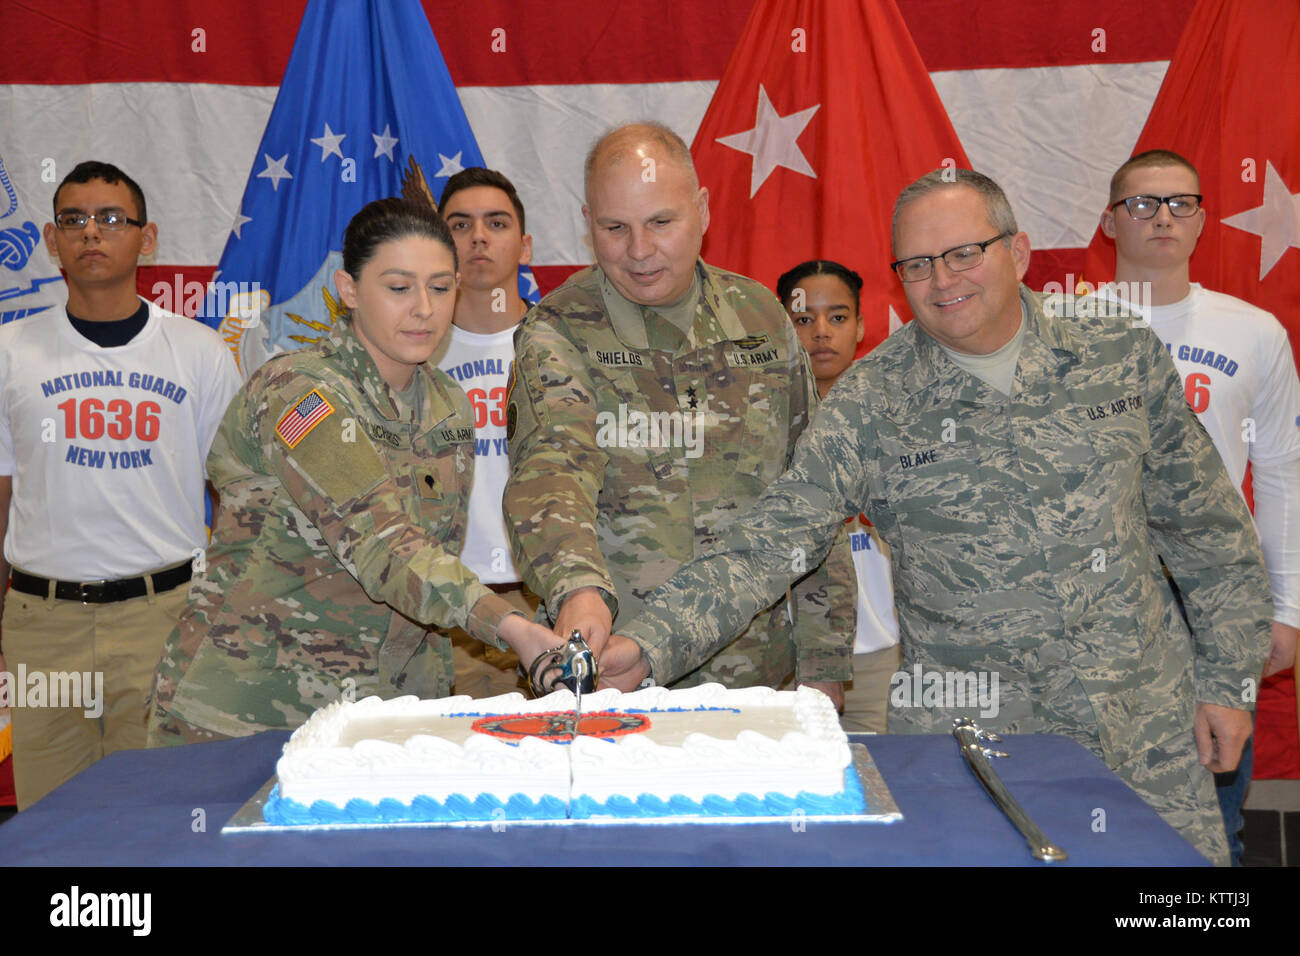 Maj. Gen. Raymond Shields, assistant adjutant general, Army, of New York (middle) joins the oldest and newest members of the New York National Guard to cut a cake in celebration of the National Guard’s 381th birthday at New York National Guard headquarters in Latham, N.Y. on December, 13 2017. The National Guard was established in 1636 and is the oldest military force in the Department of Defense. The new and old members are Spc. Jade Richards, age 19, New York Army National Guard (left); Chief Master Sgt. Michael Blake, one of the New York Air National Guard’s oldest serving Soldiers (right). Stock Photo